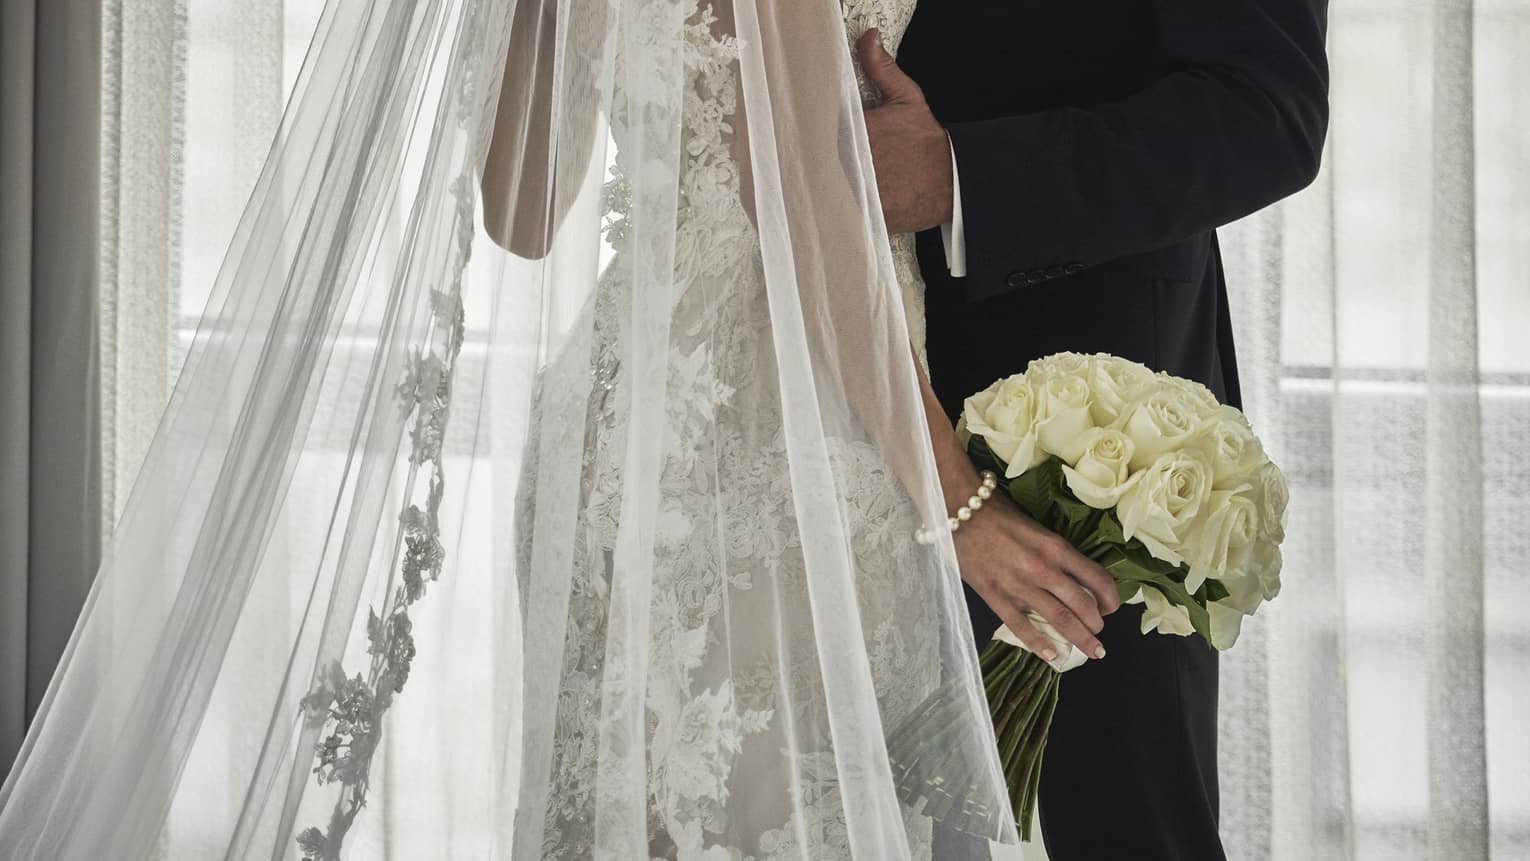 Groom and bride with long lace veil and white wedding bouquet embrace